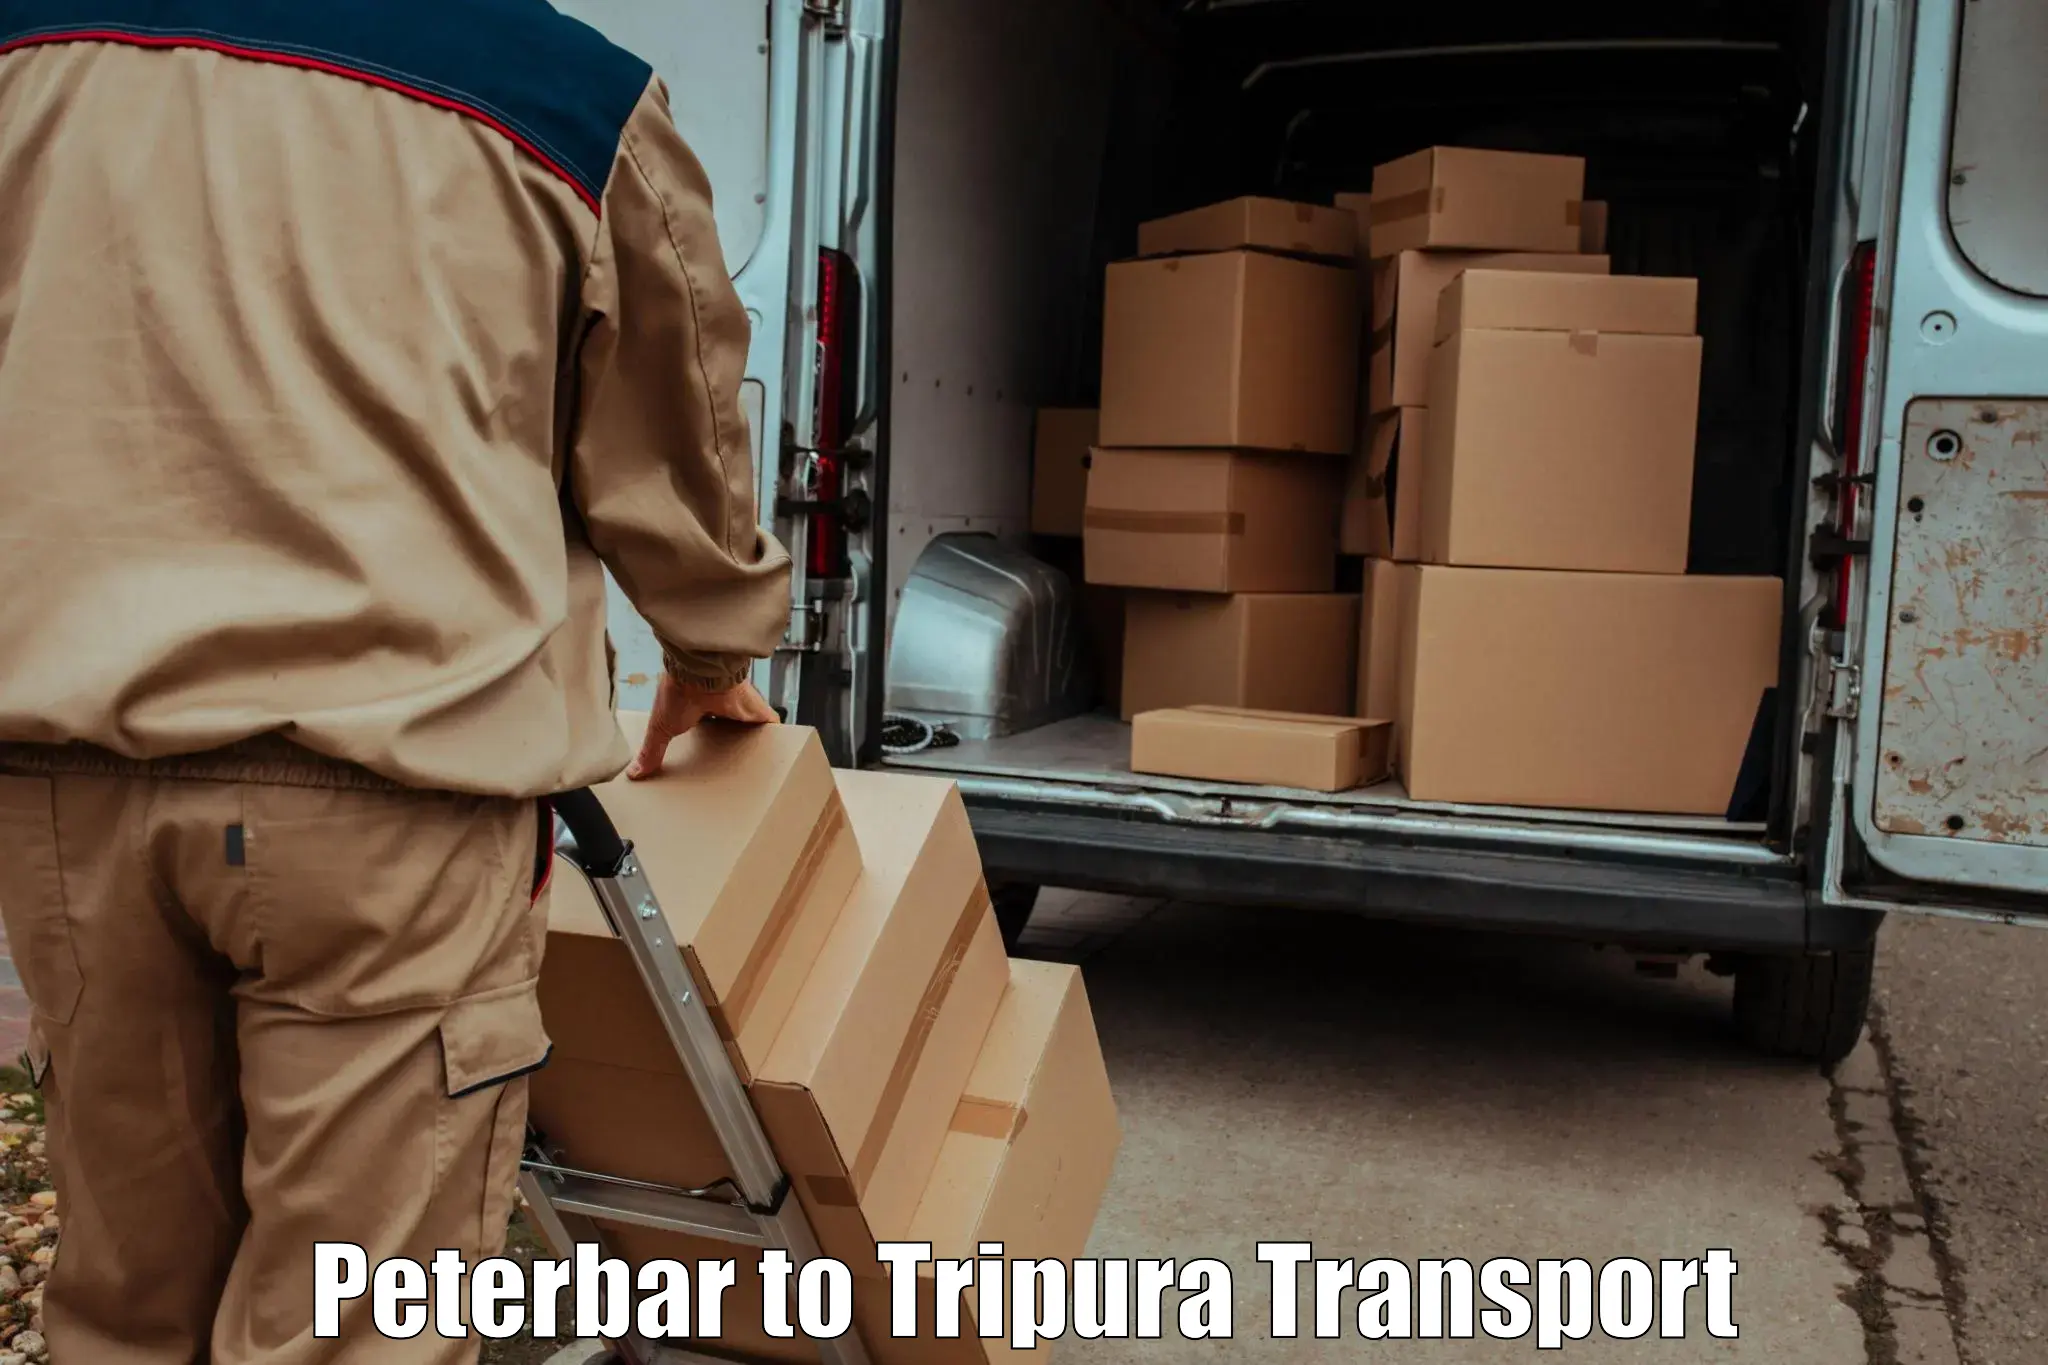 Container transport service Peterbar to Udaipur Tripura